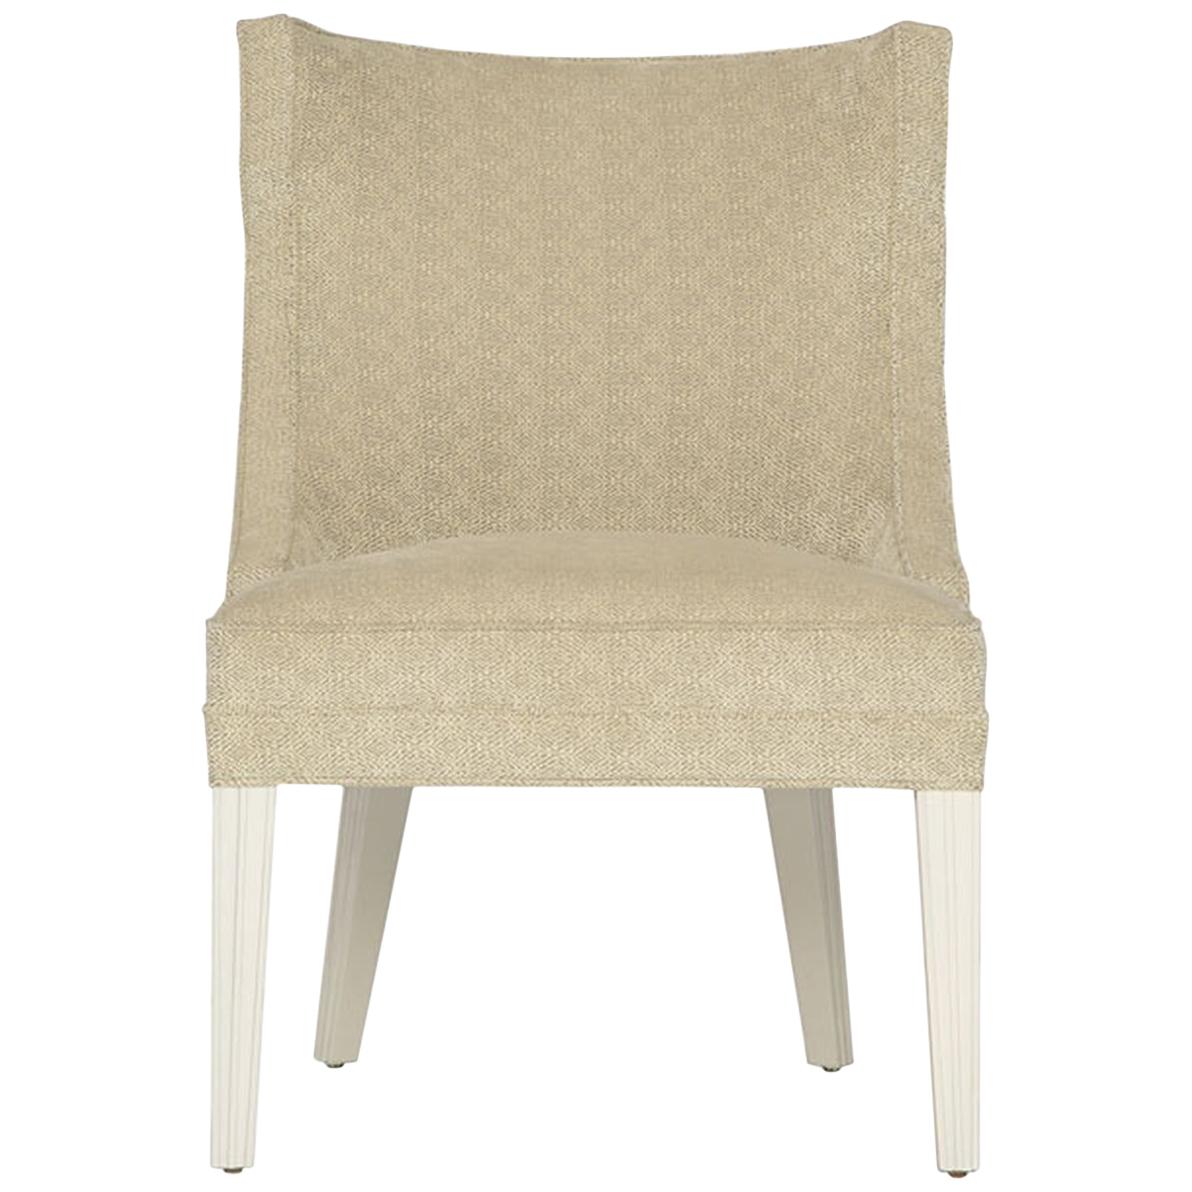 Balboa Dining Chair in Beige with Lacquered White Legs by Innova Luxuxy Group For Sale